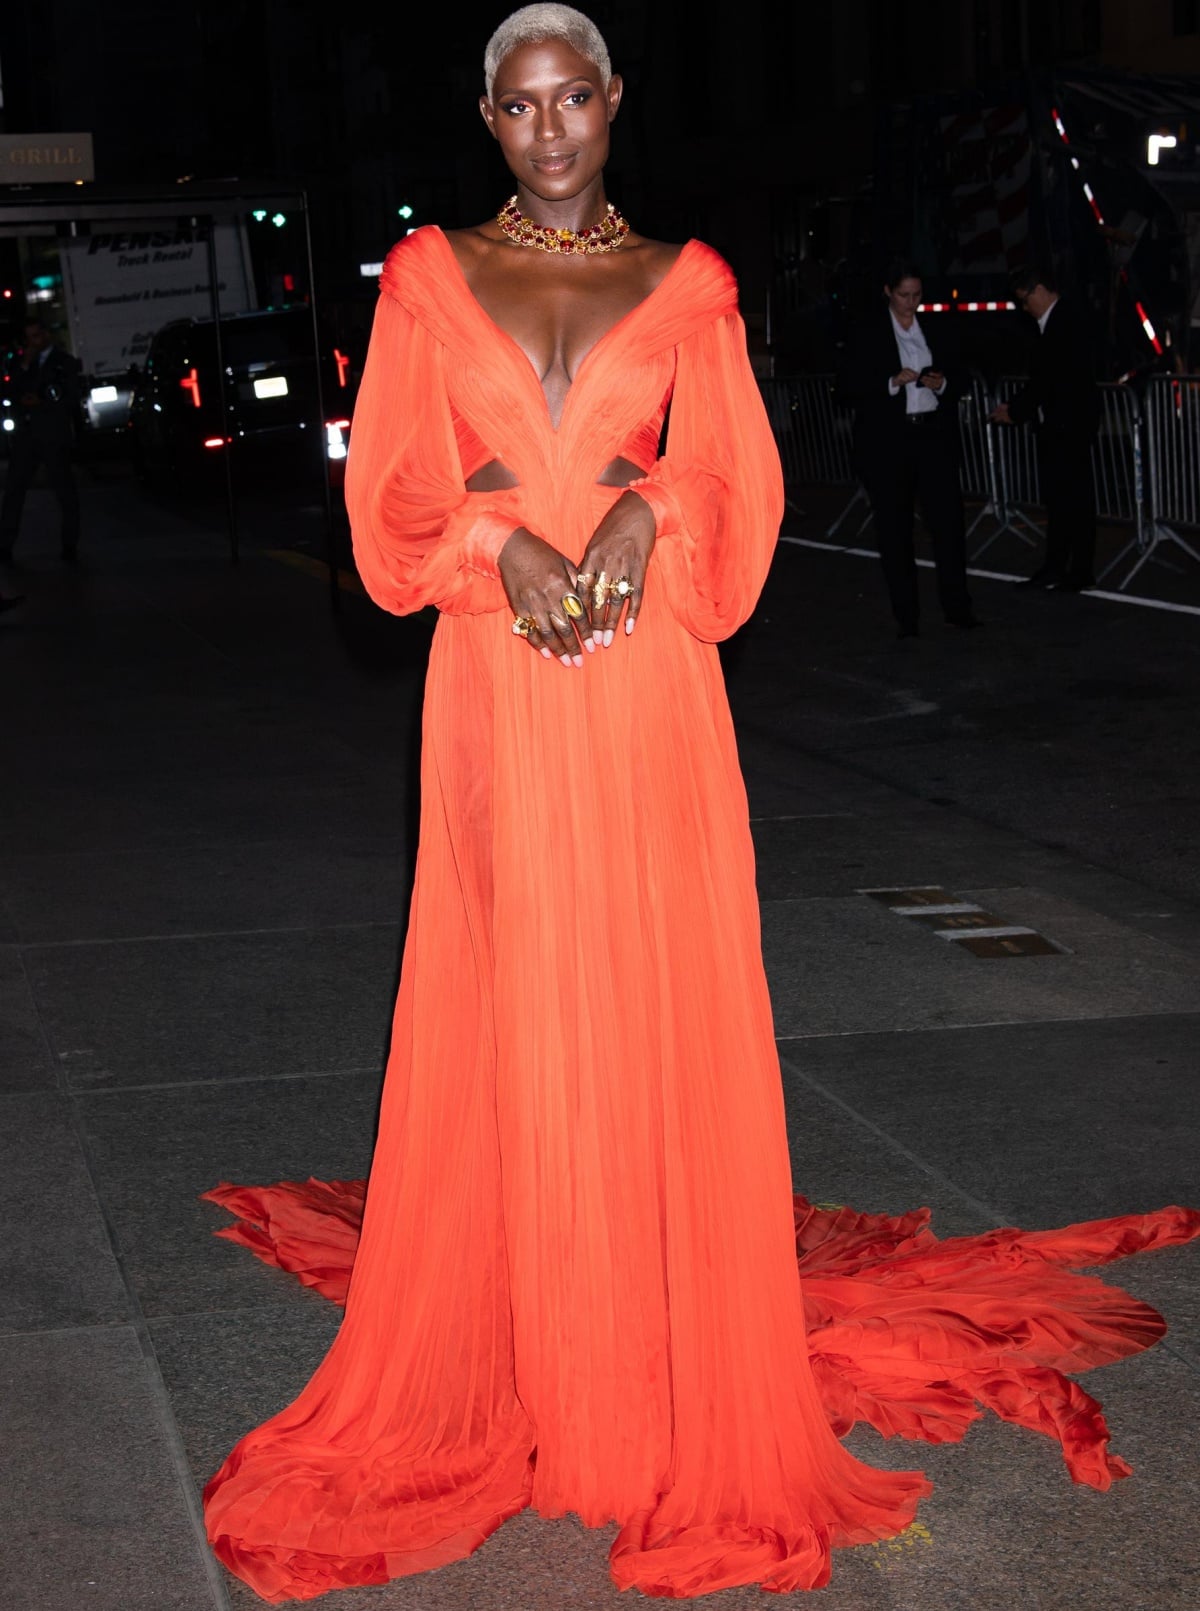 Jodie Turner-Smith wearing a Gucci orange chiffon gown at The Kering Foundation’s Caring for Women Dinner